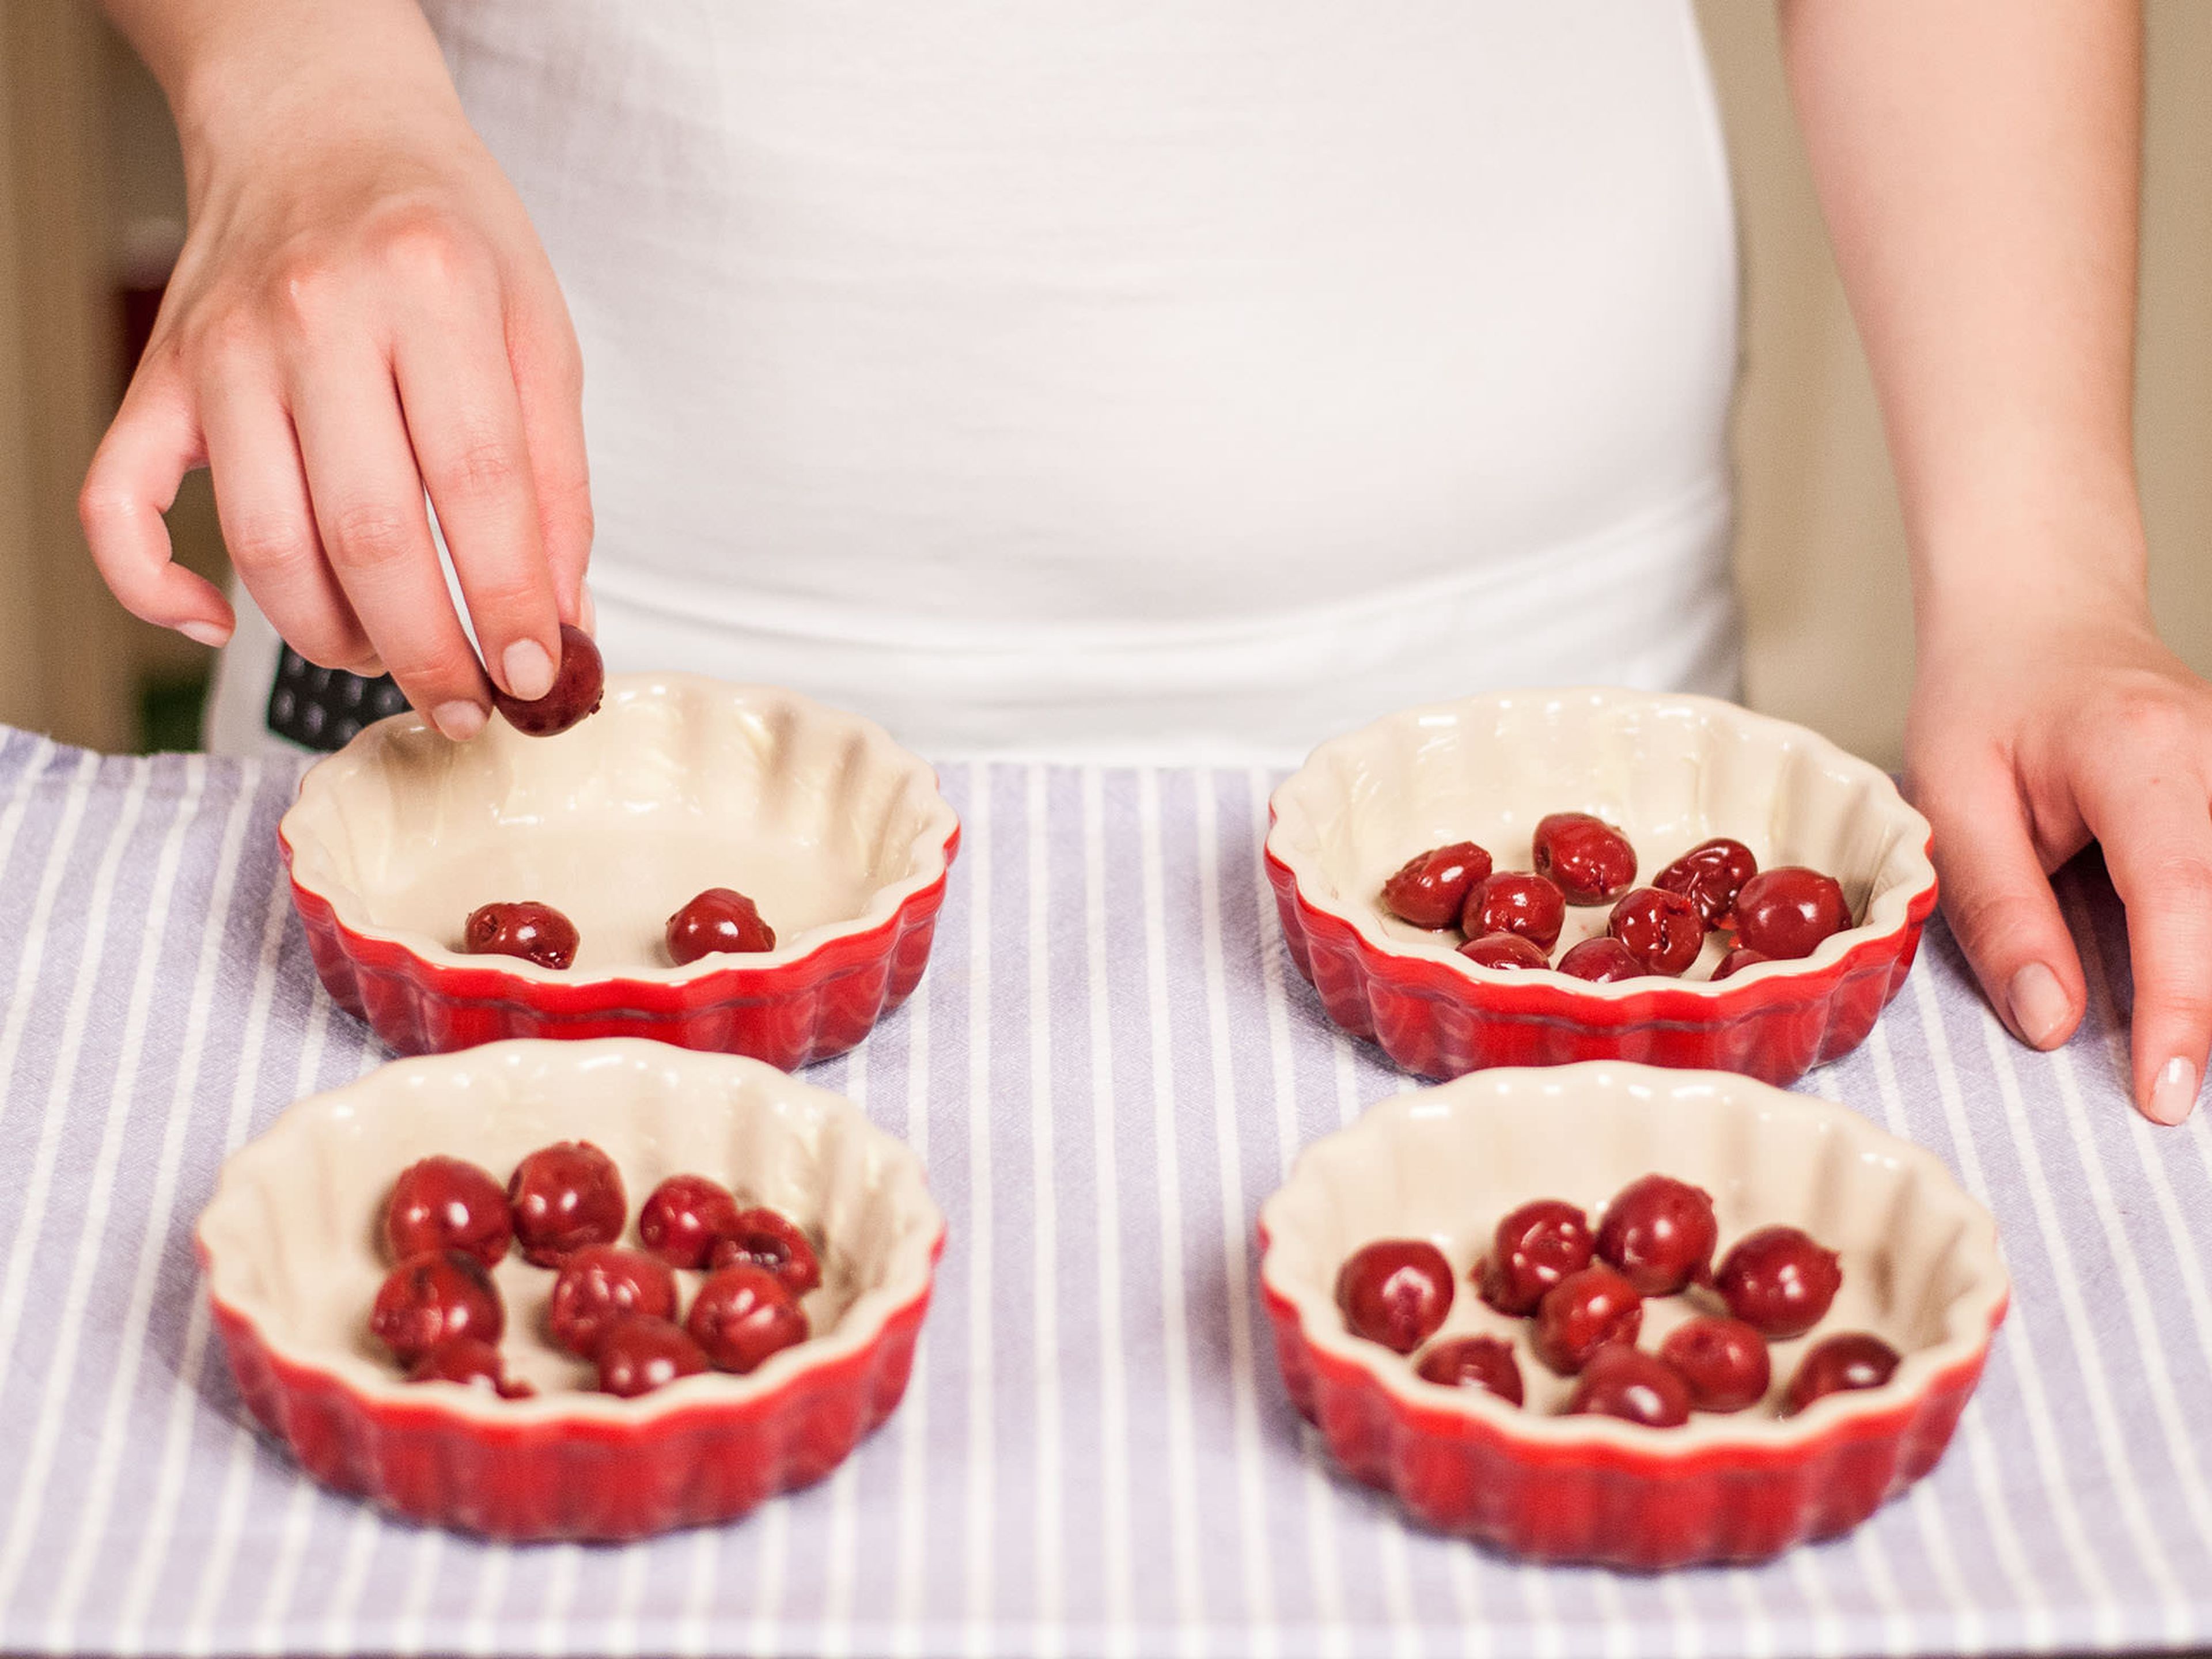 Drain cherries and place into baking tins.